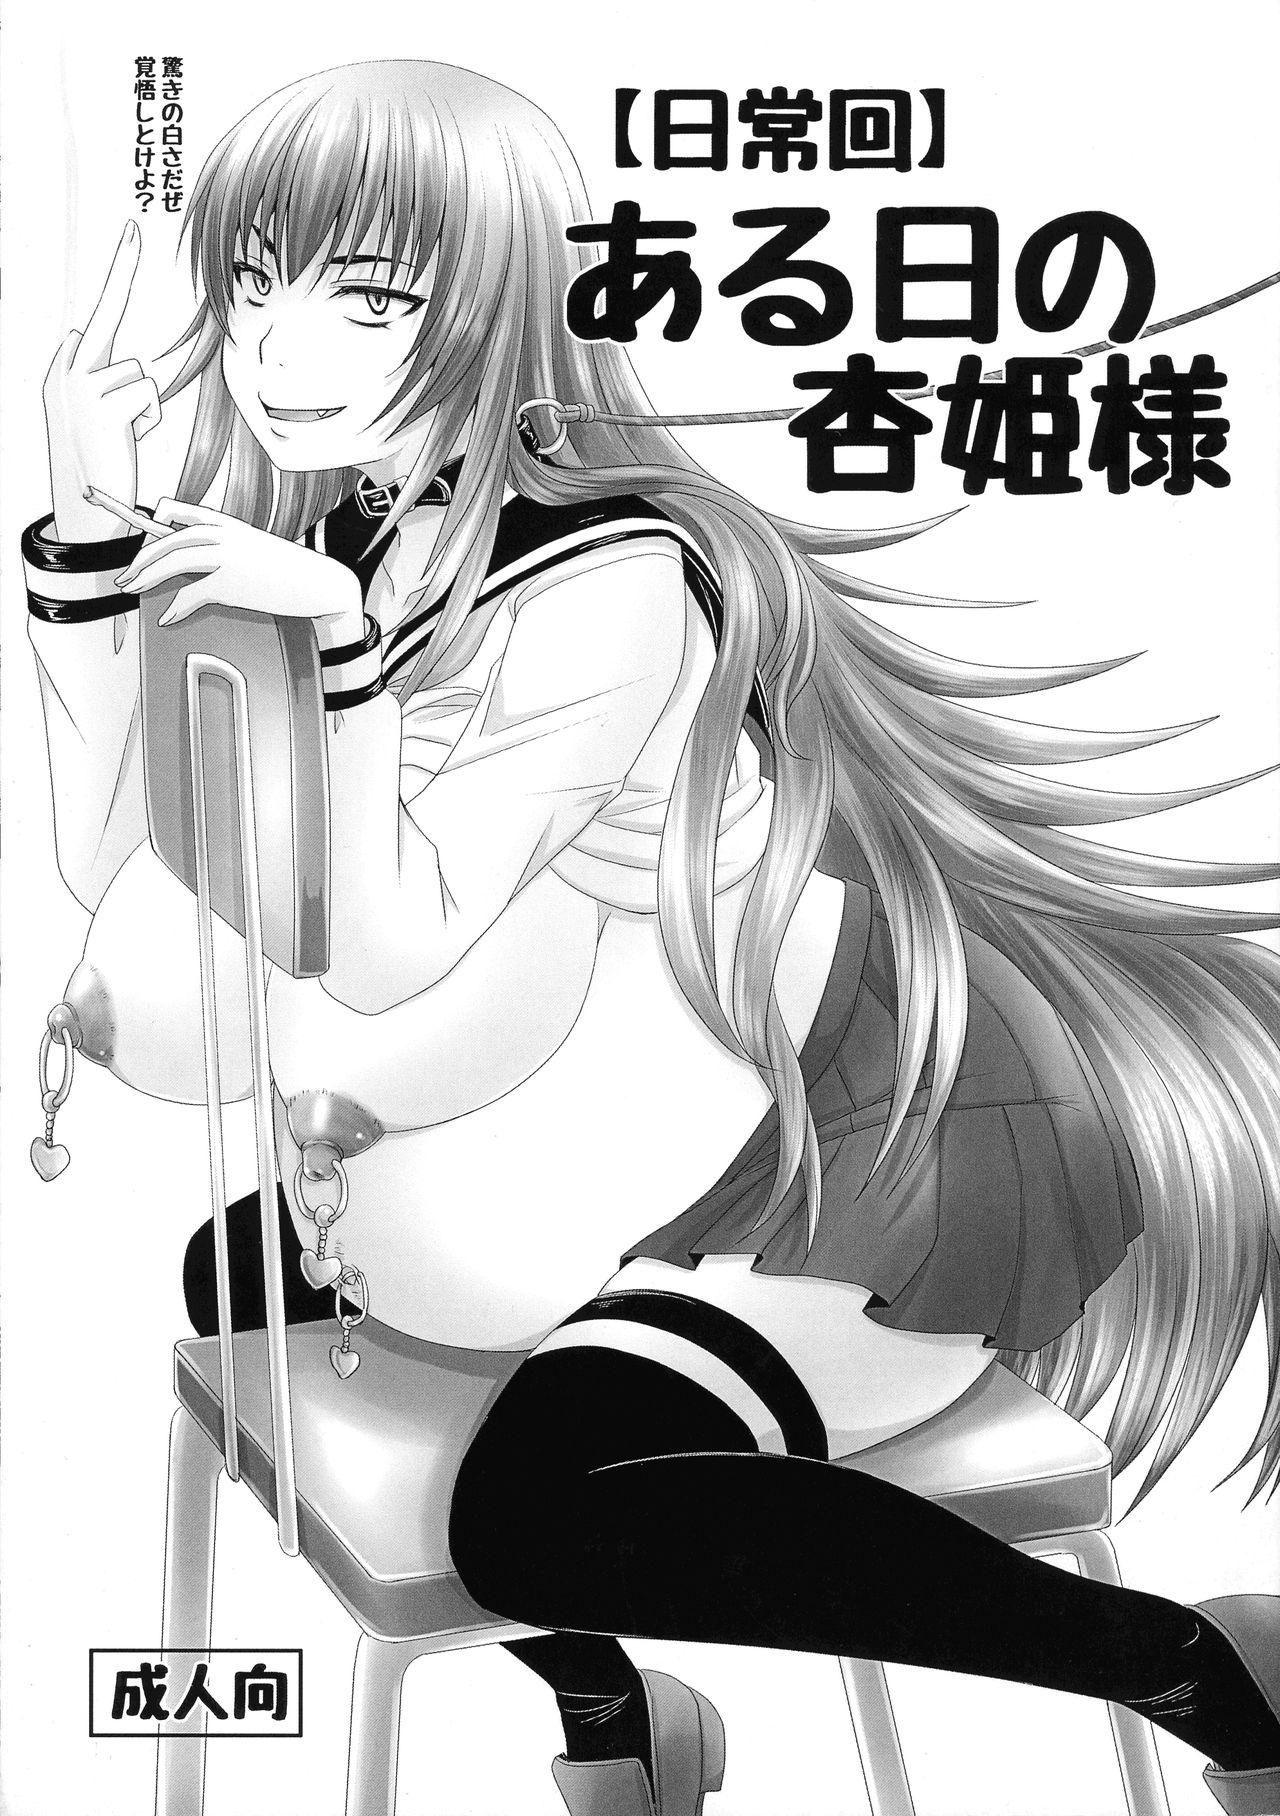 Perra Aruhi no Kyouhime Yanks Featured - Picture 1